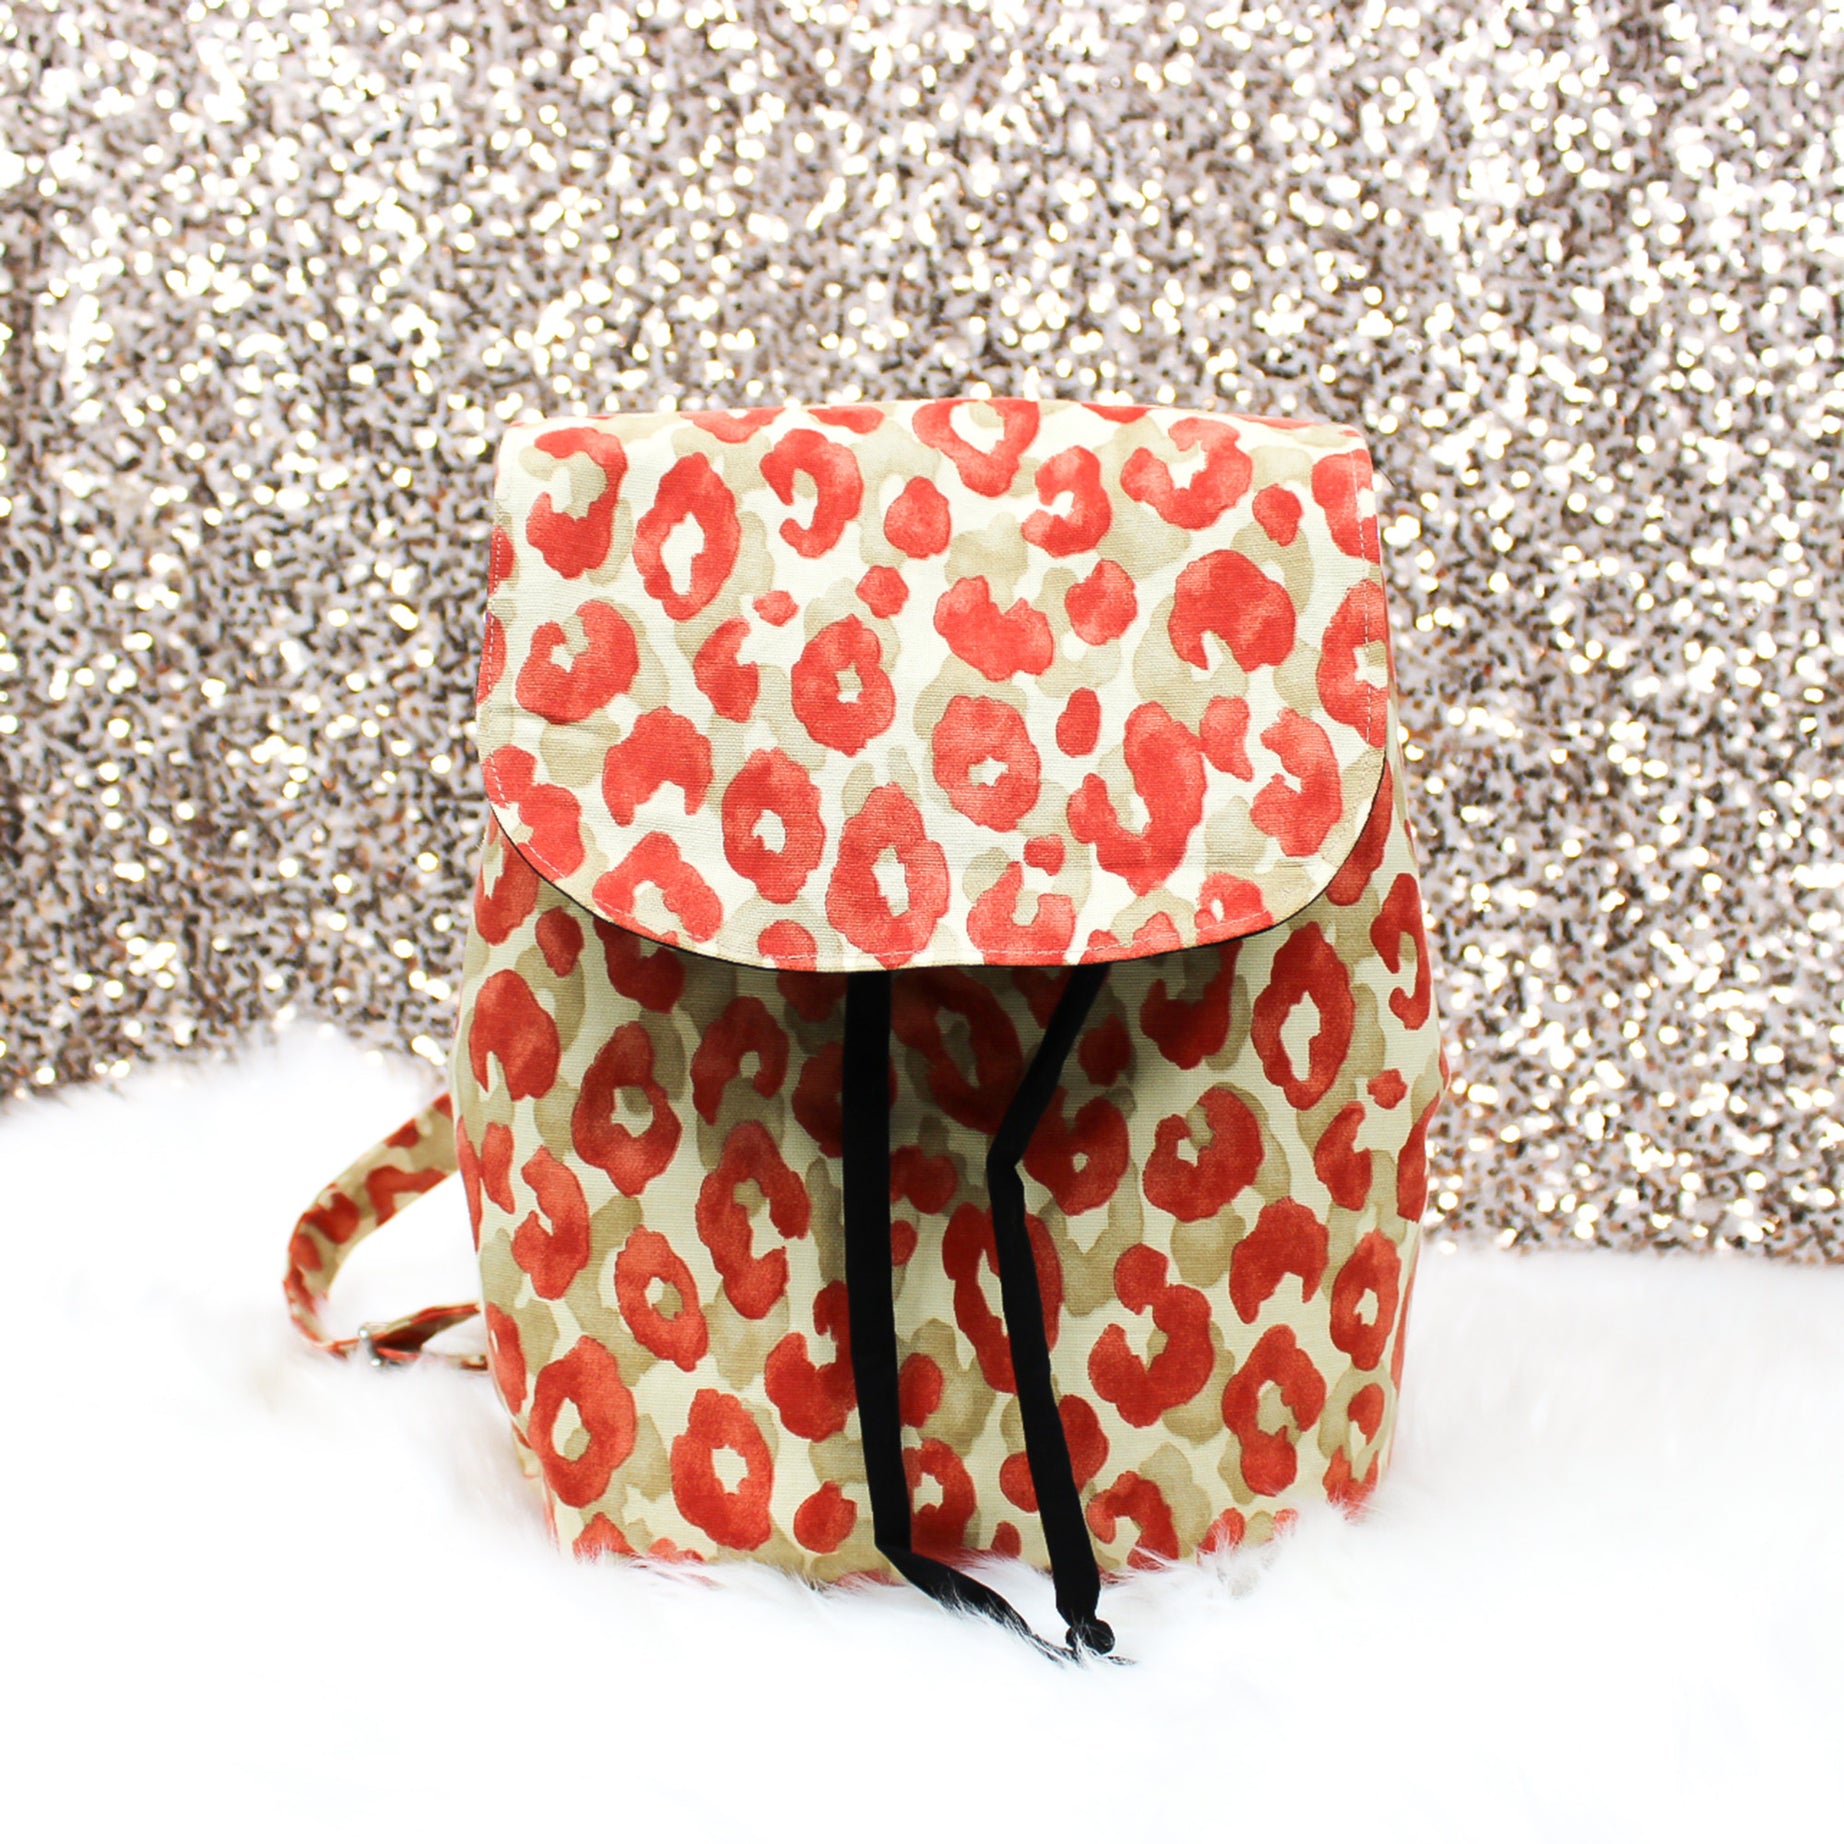 Leopard Print Canvas Backpack Purse, Red and Beige, Cinch Bag